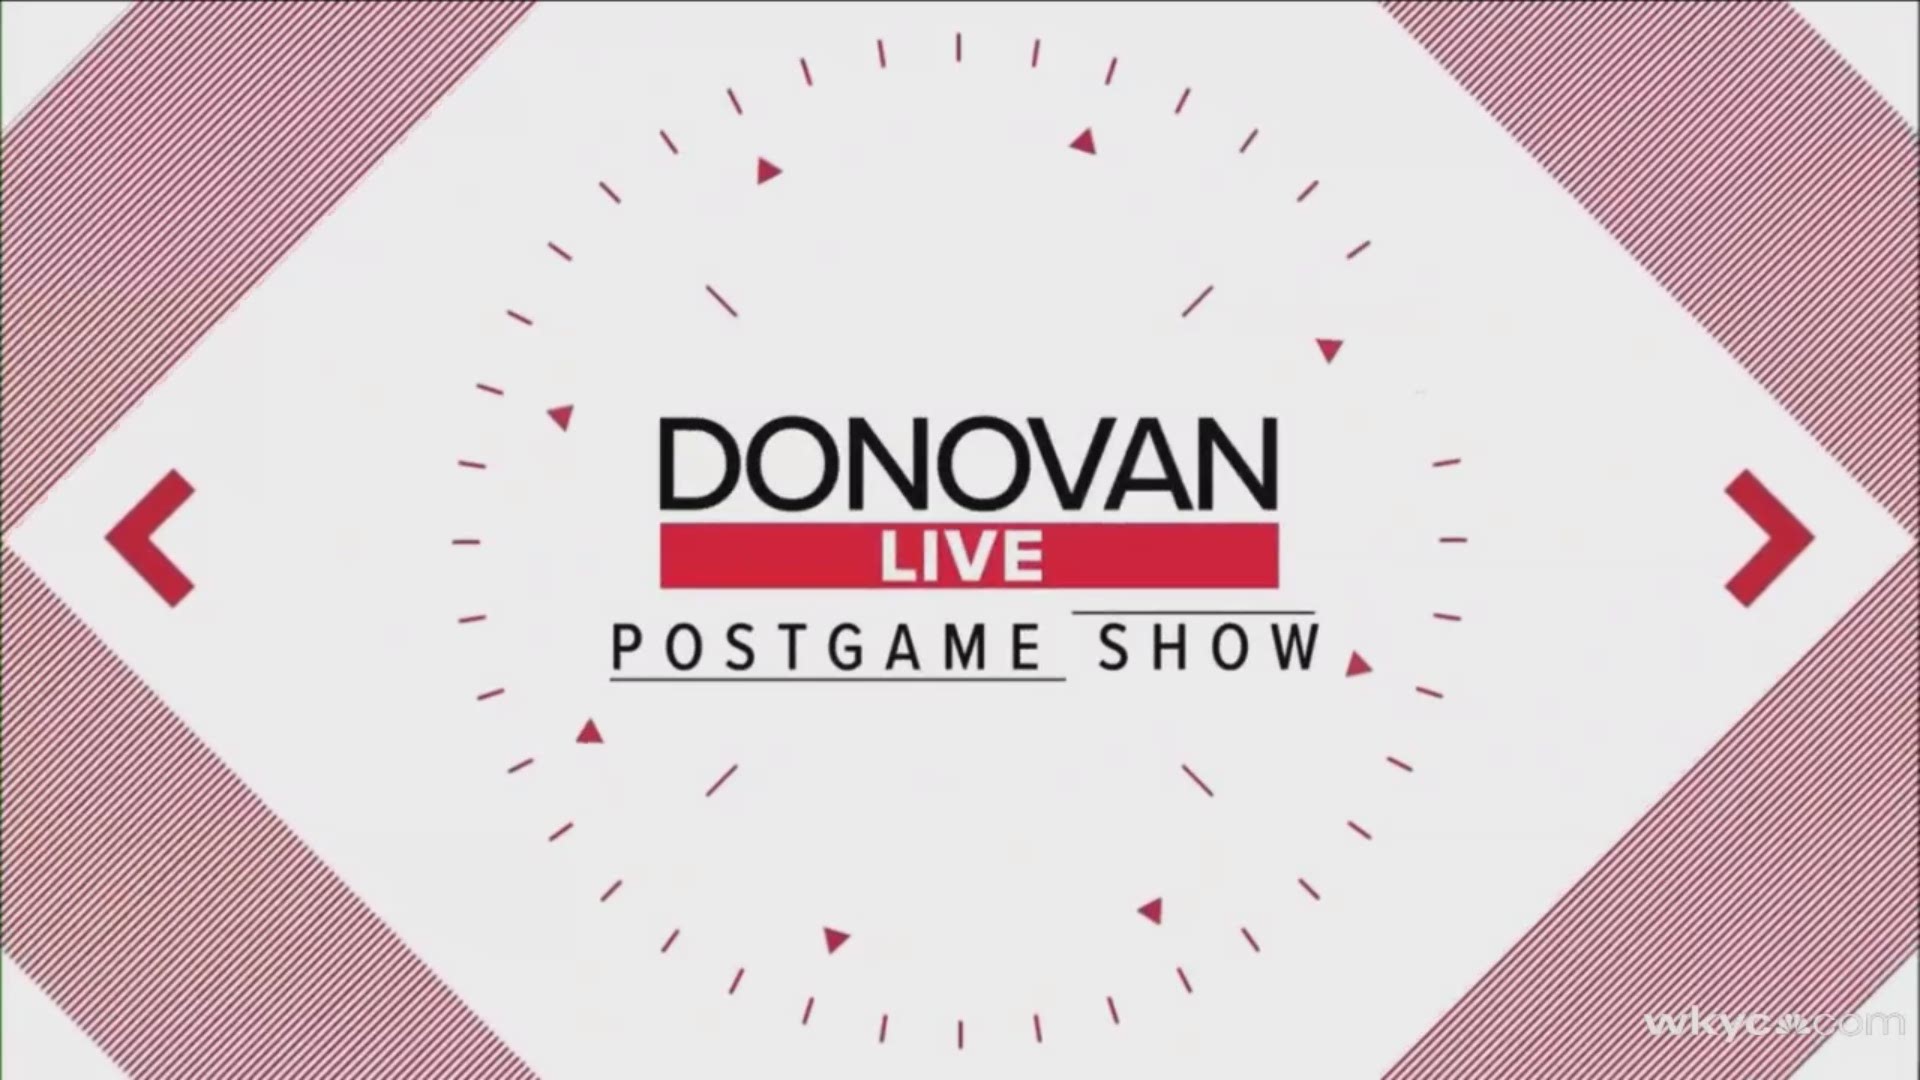 Thoughts on the Cleveland Indians with 2 weeks left until Opening Day: The Donovan Live Postgame Show